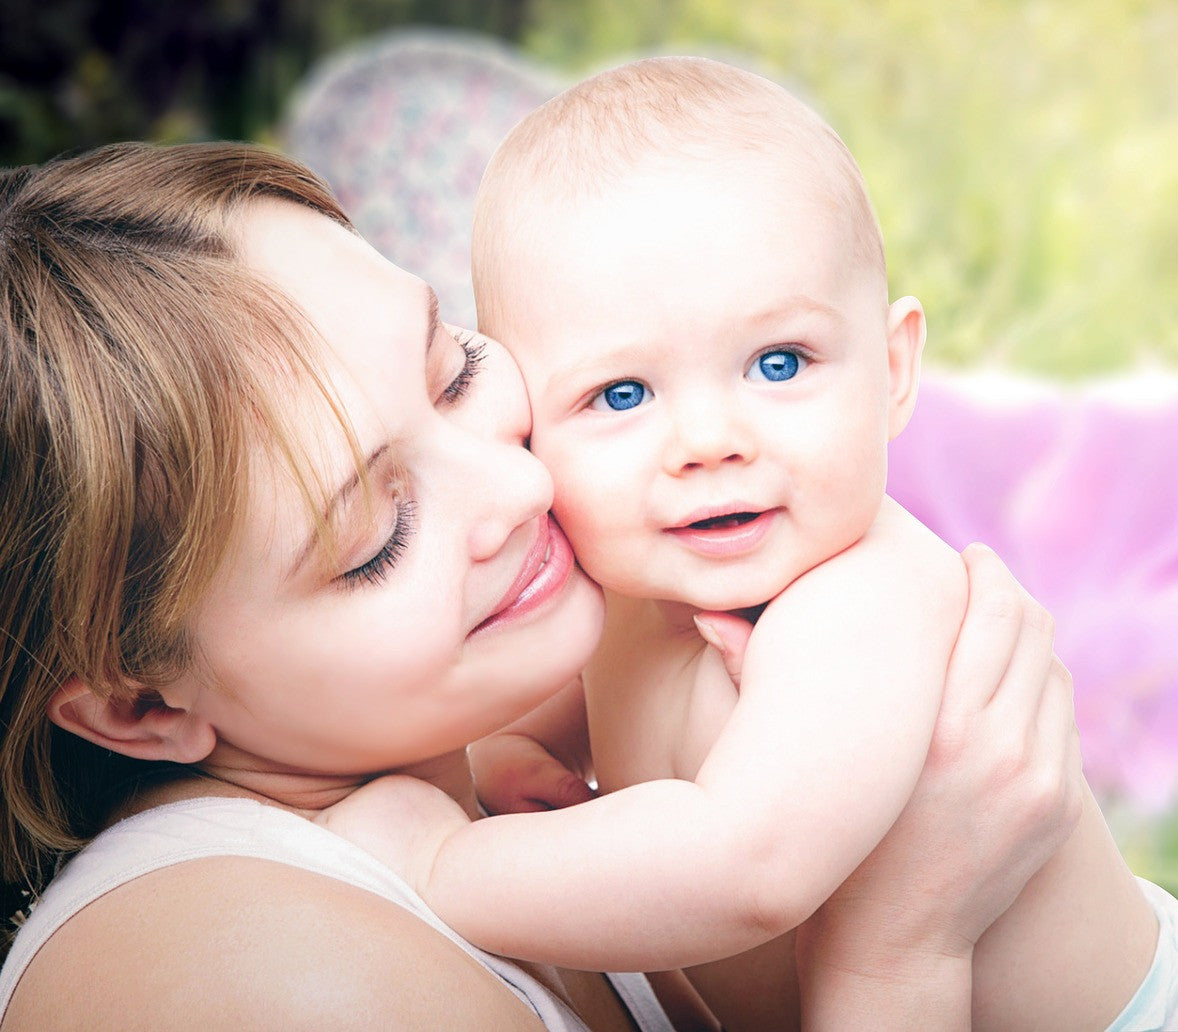 Will I Have A Hard Time Getting Pregnant If I Am Breastfeeding?